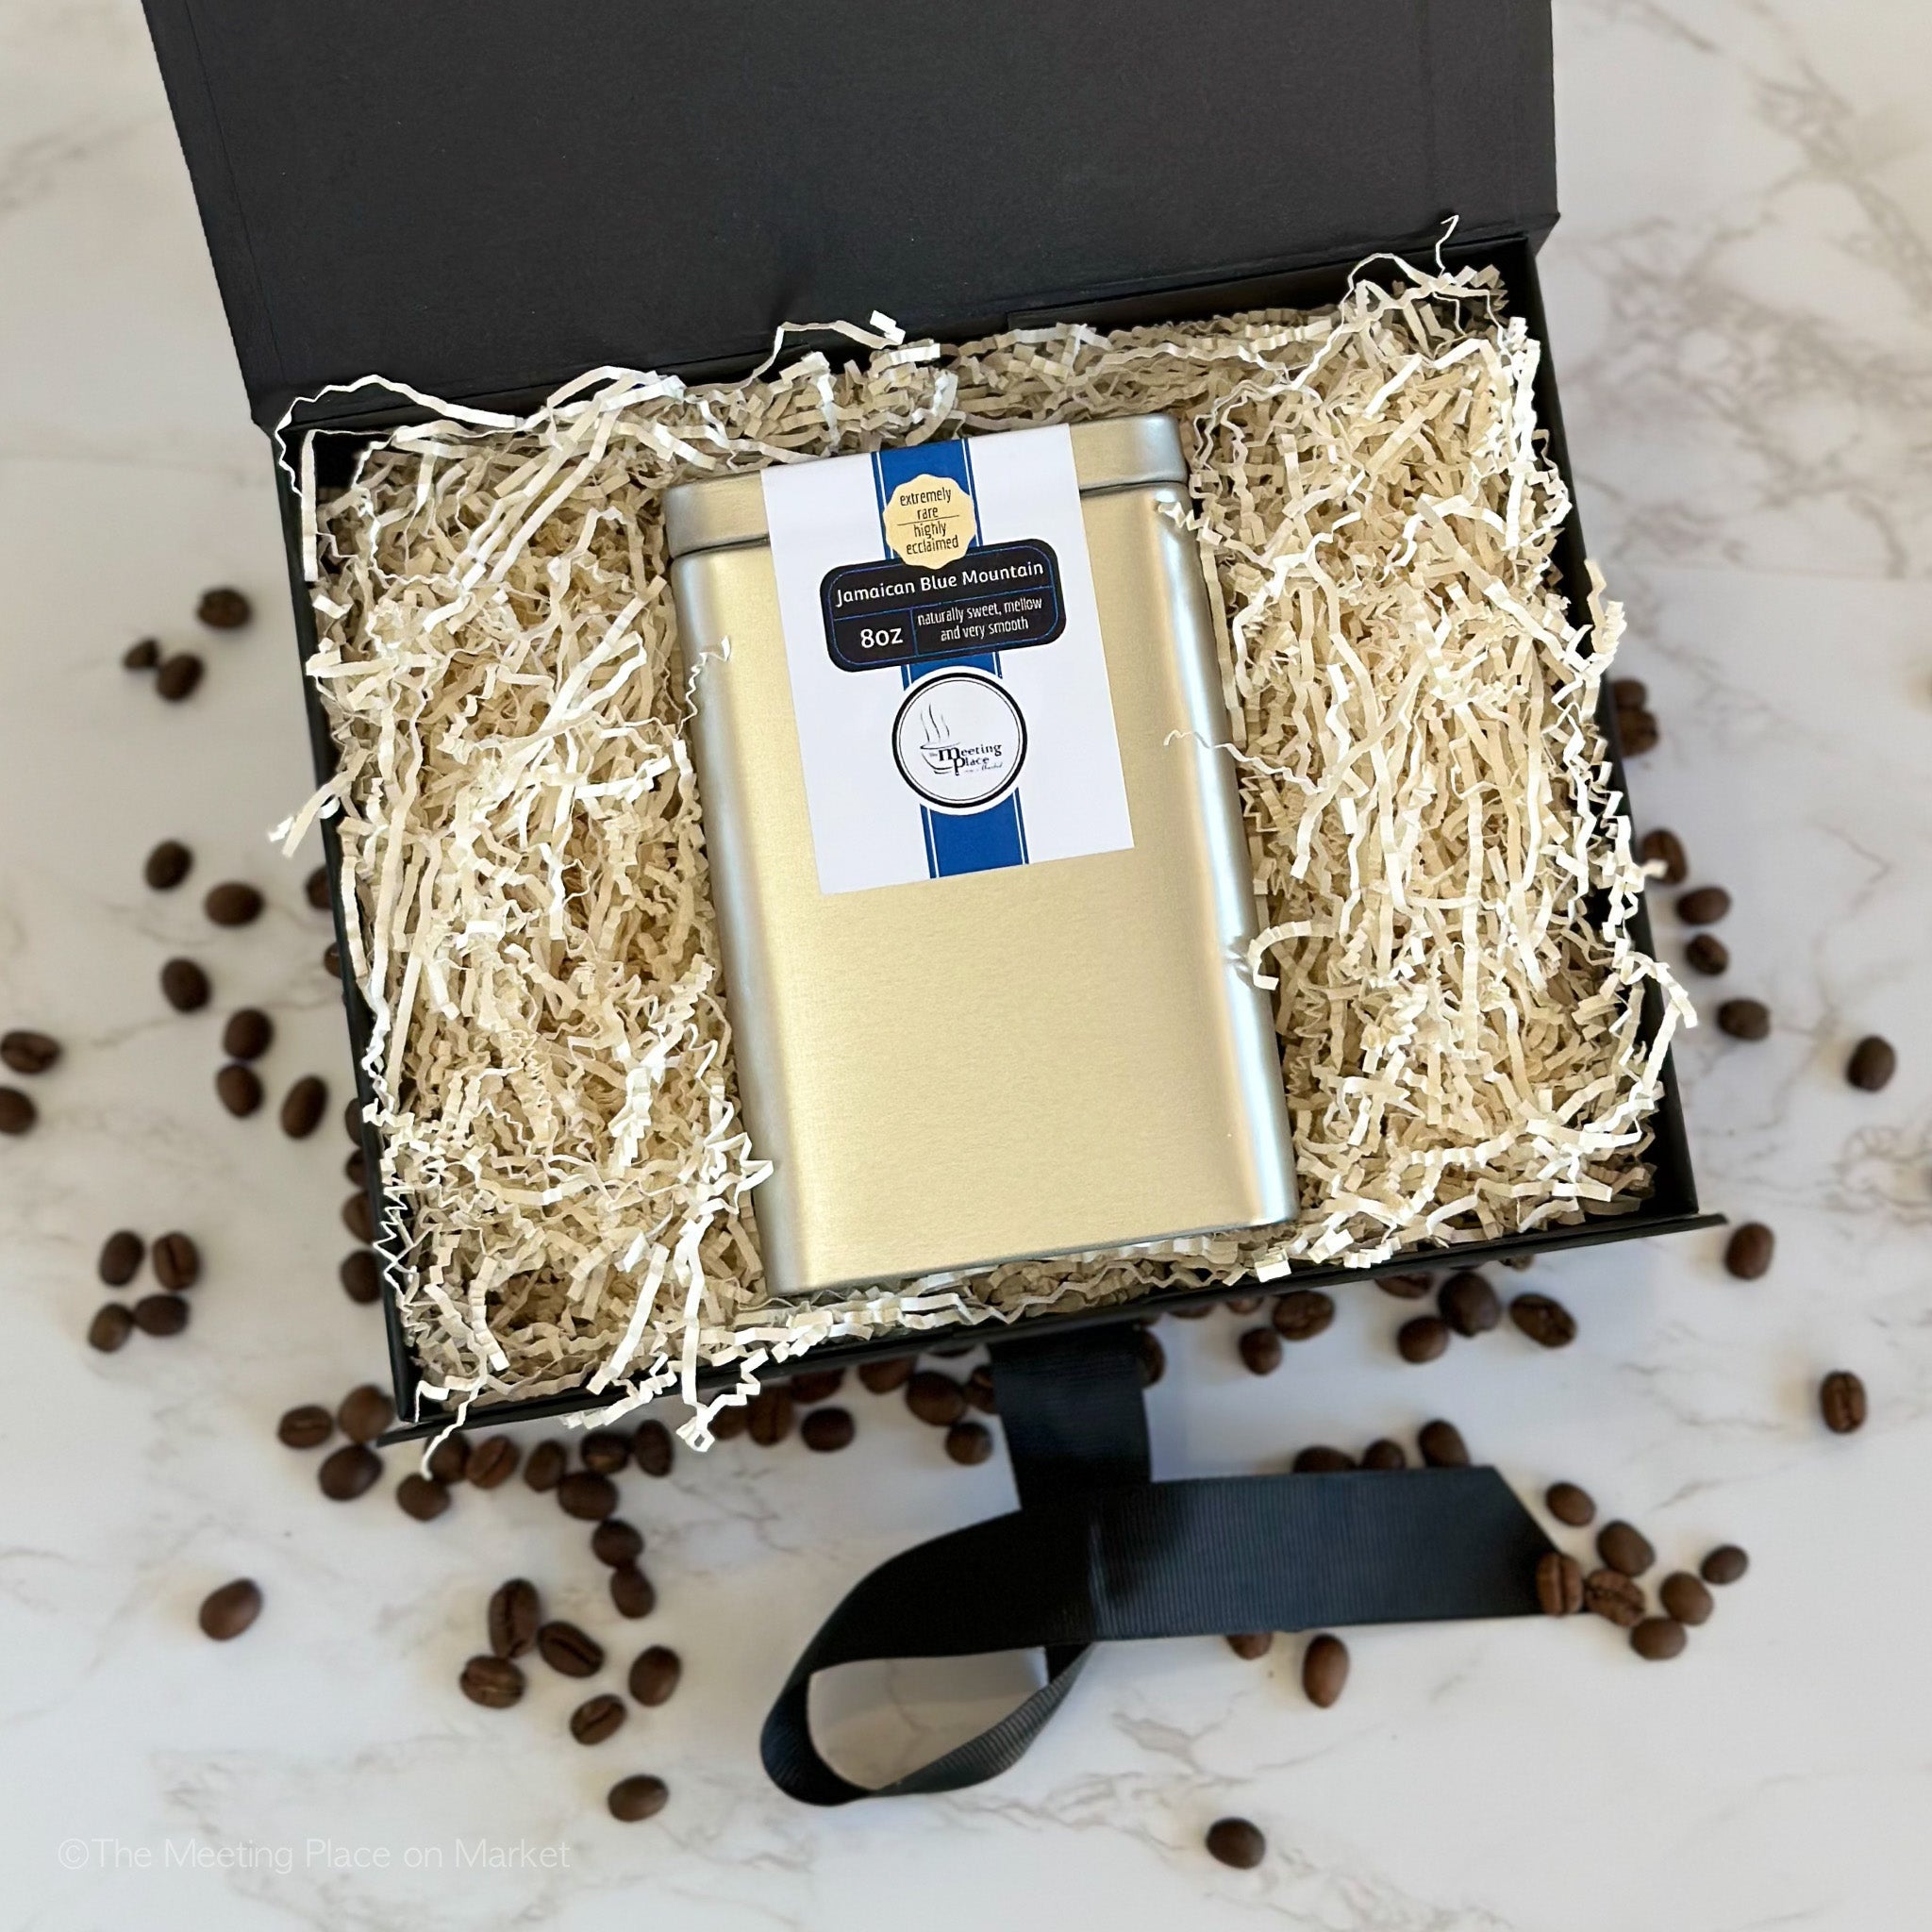 Luxury Coffee Gift Box with Rare Jamaican Blue Mountain Coffee, 100% Certified Blue Mountain Gourmet Coffee - The Meeting Place on Market